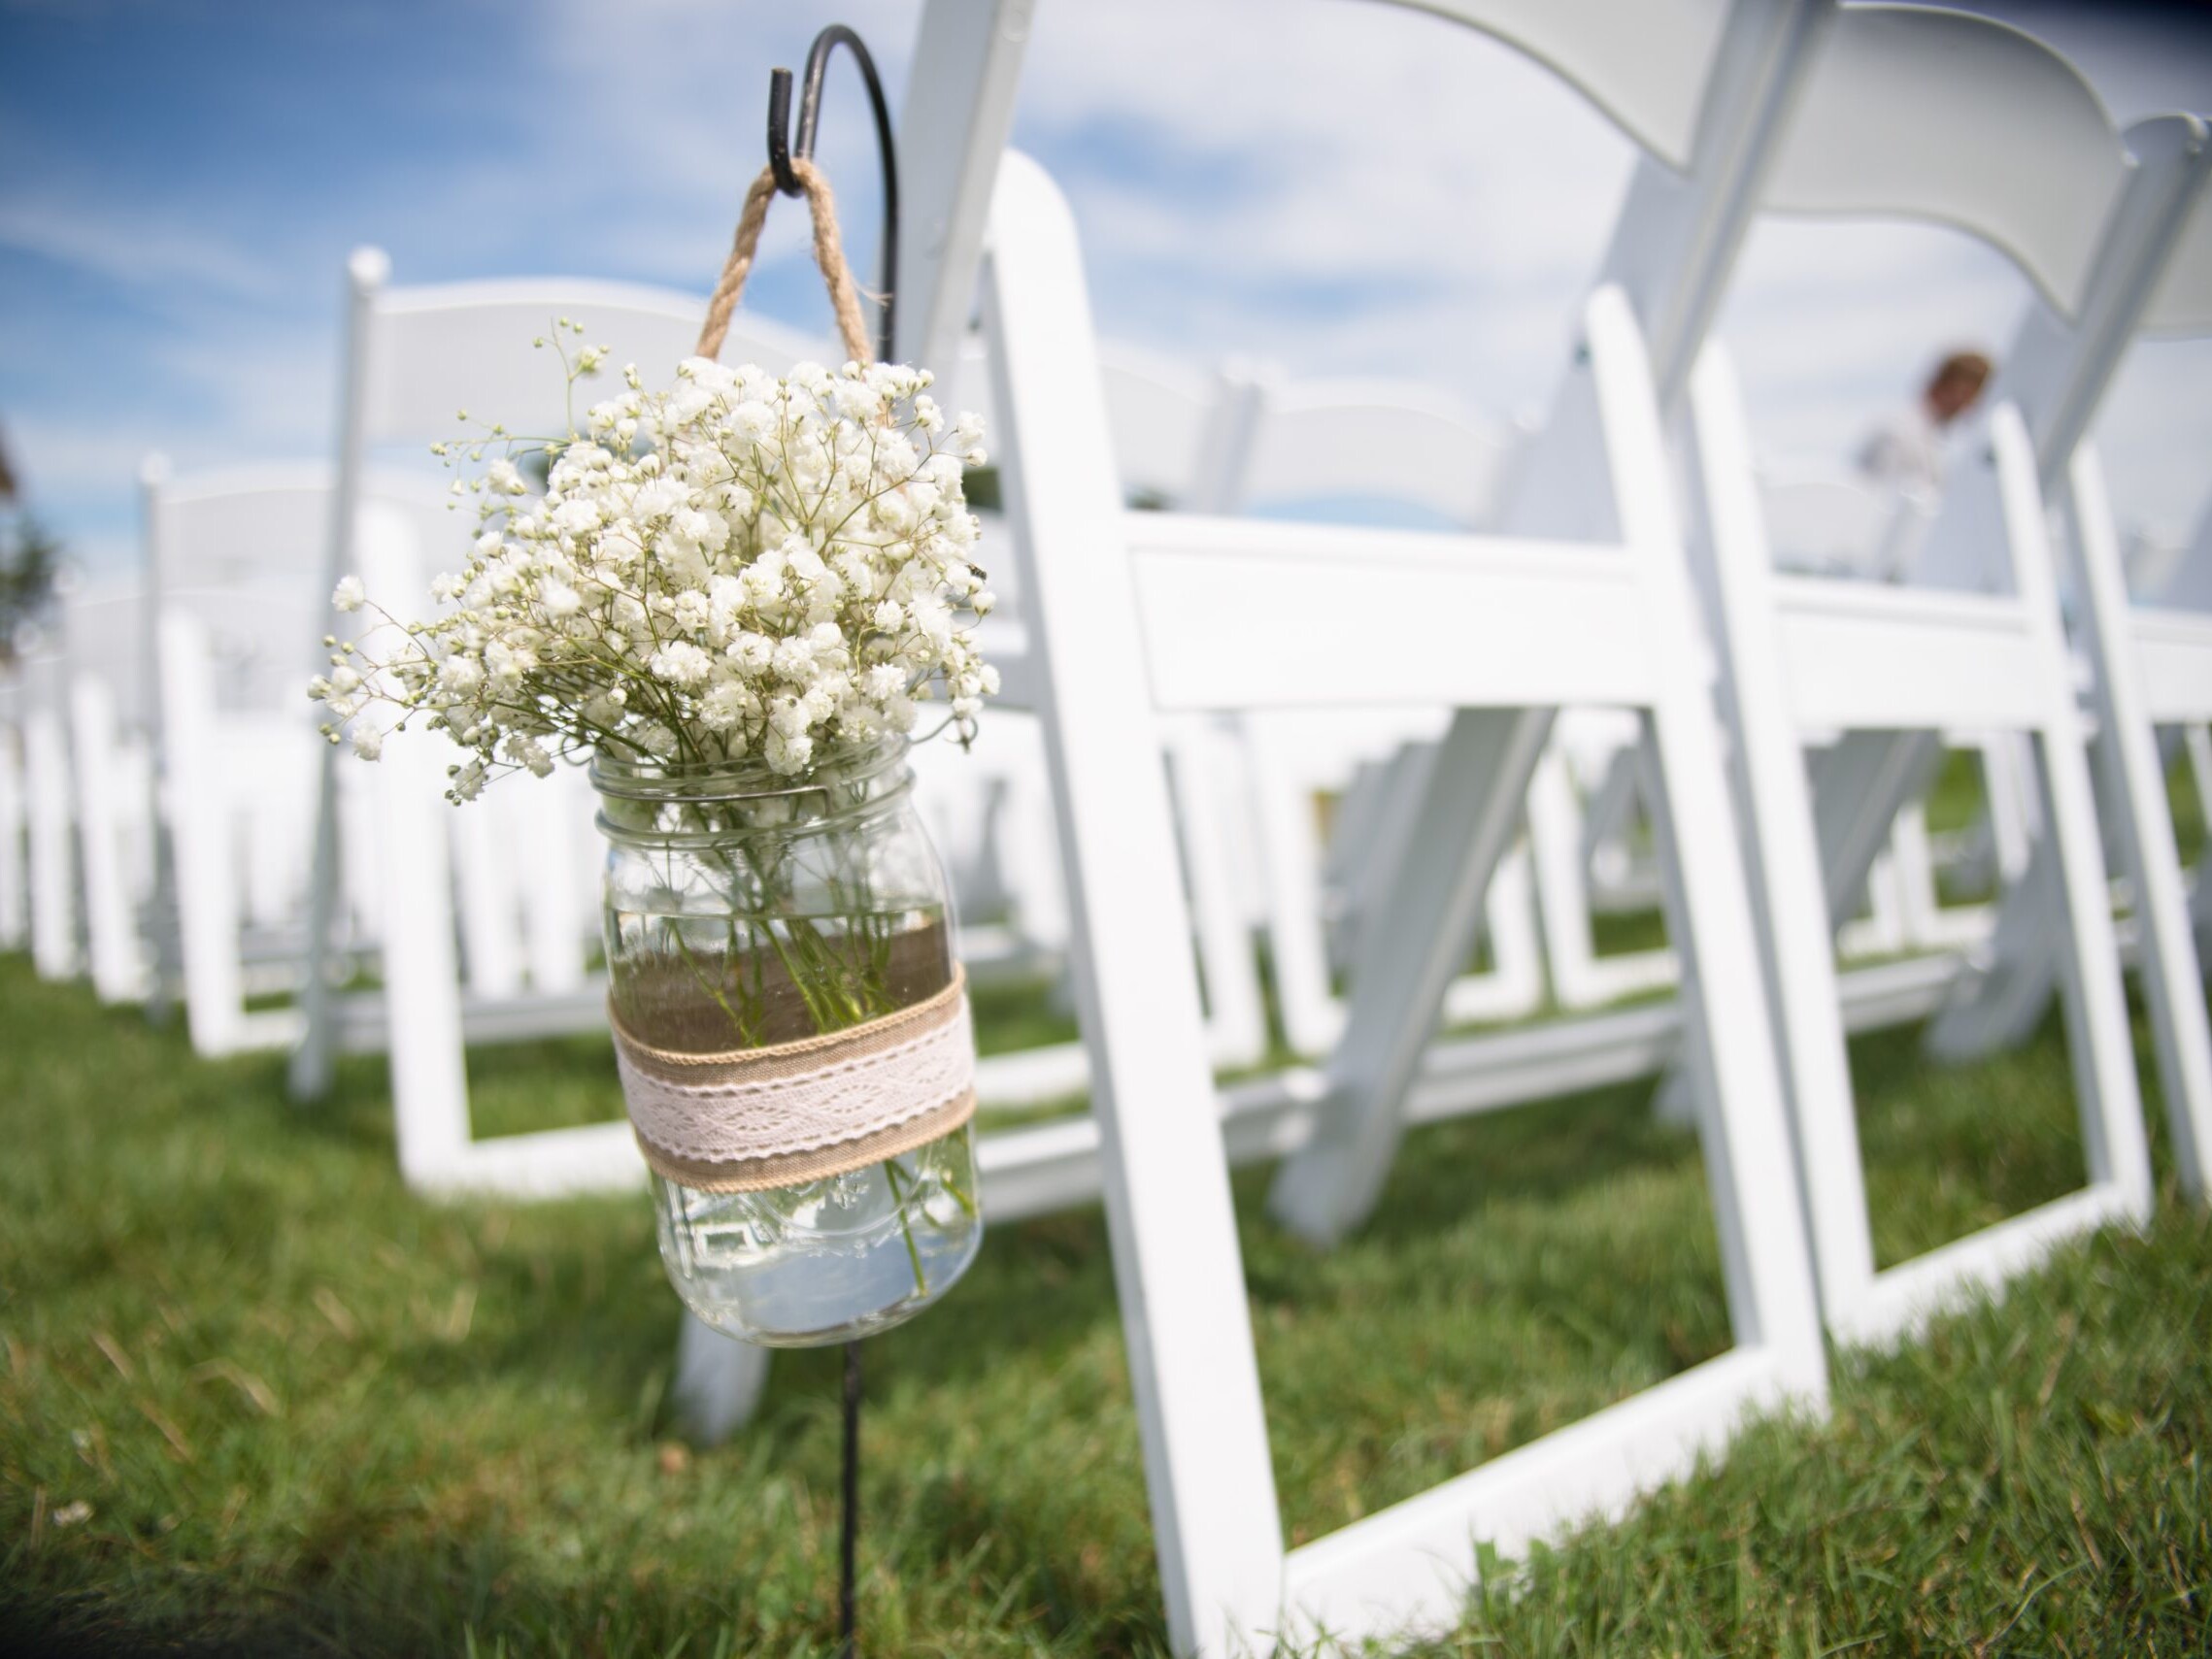 White chairs lined up for a wedding with a glass jar of flowers.